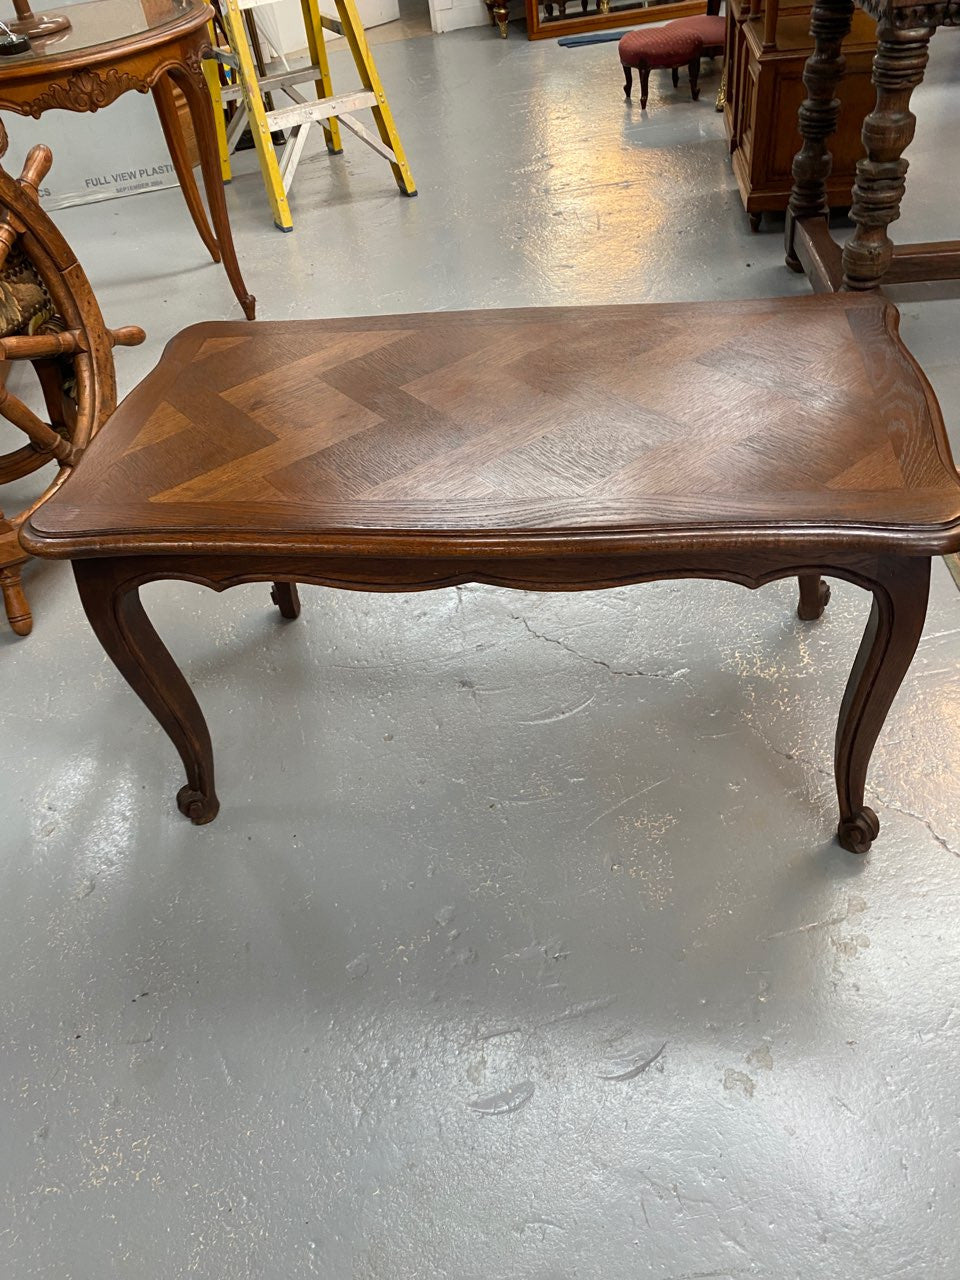 Vintage French Louis XV style coffee table. In restored condition. Has character marks, please view photos.